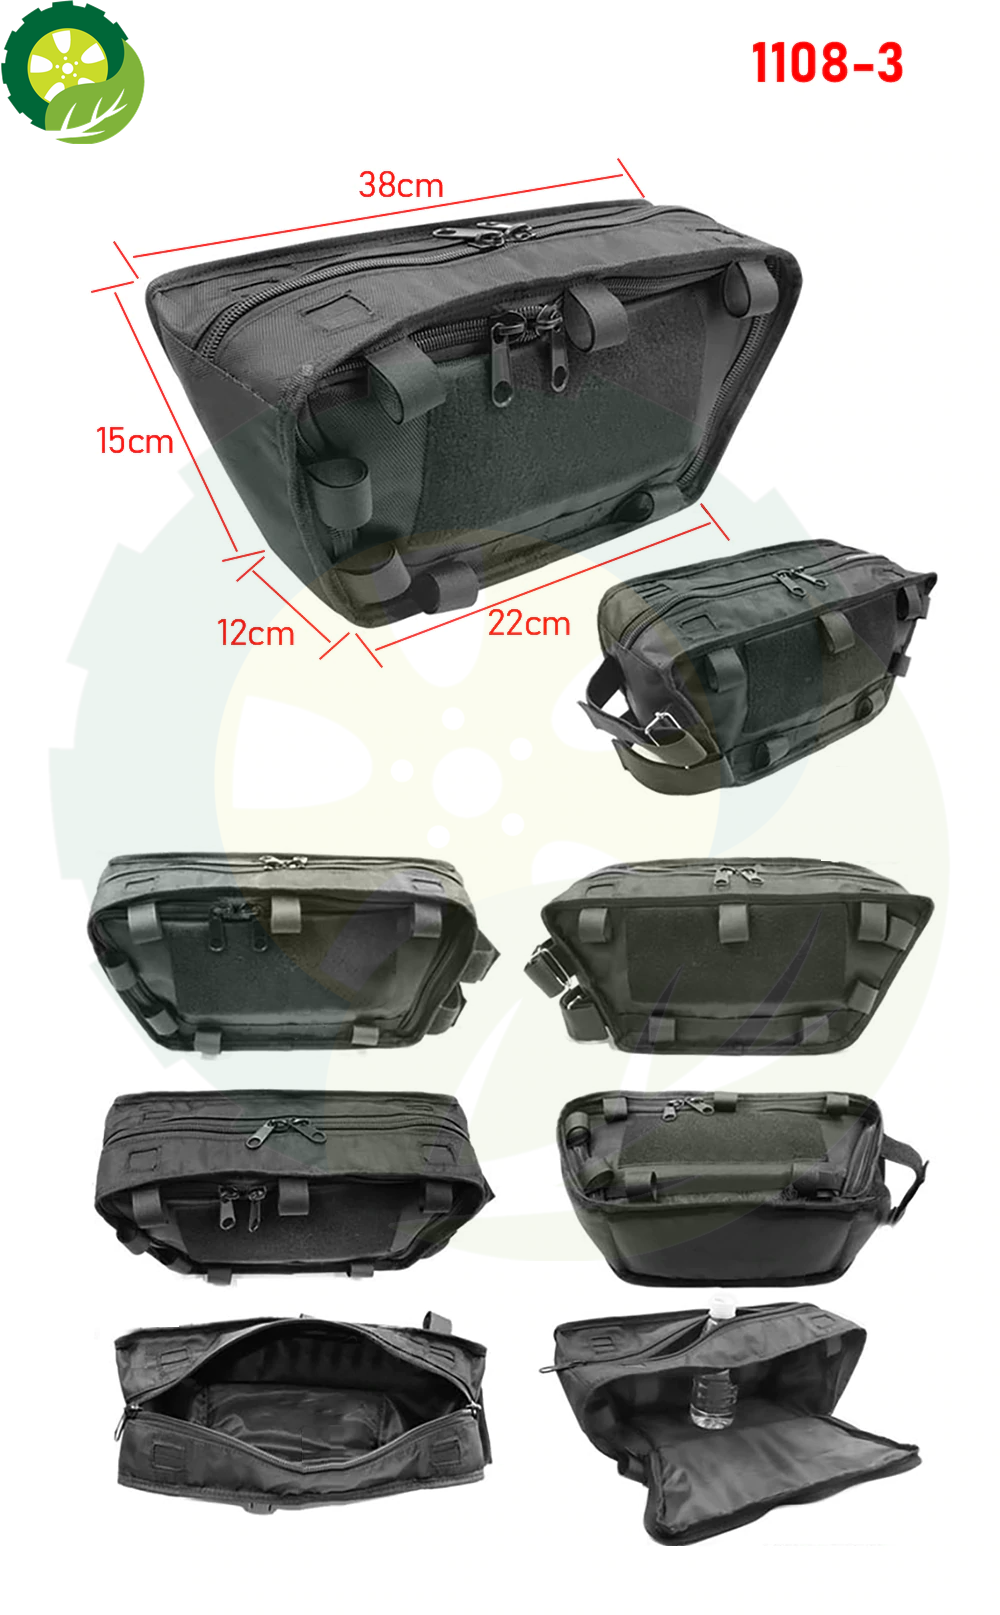 fiido Bag Travel Electric Bike Trapezoid Bag Thicken Waterproof Lithium Battery Storage Bag TIANTIAN LIFE Market Place